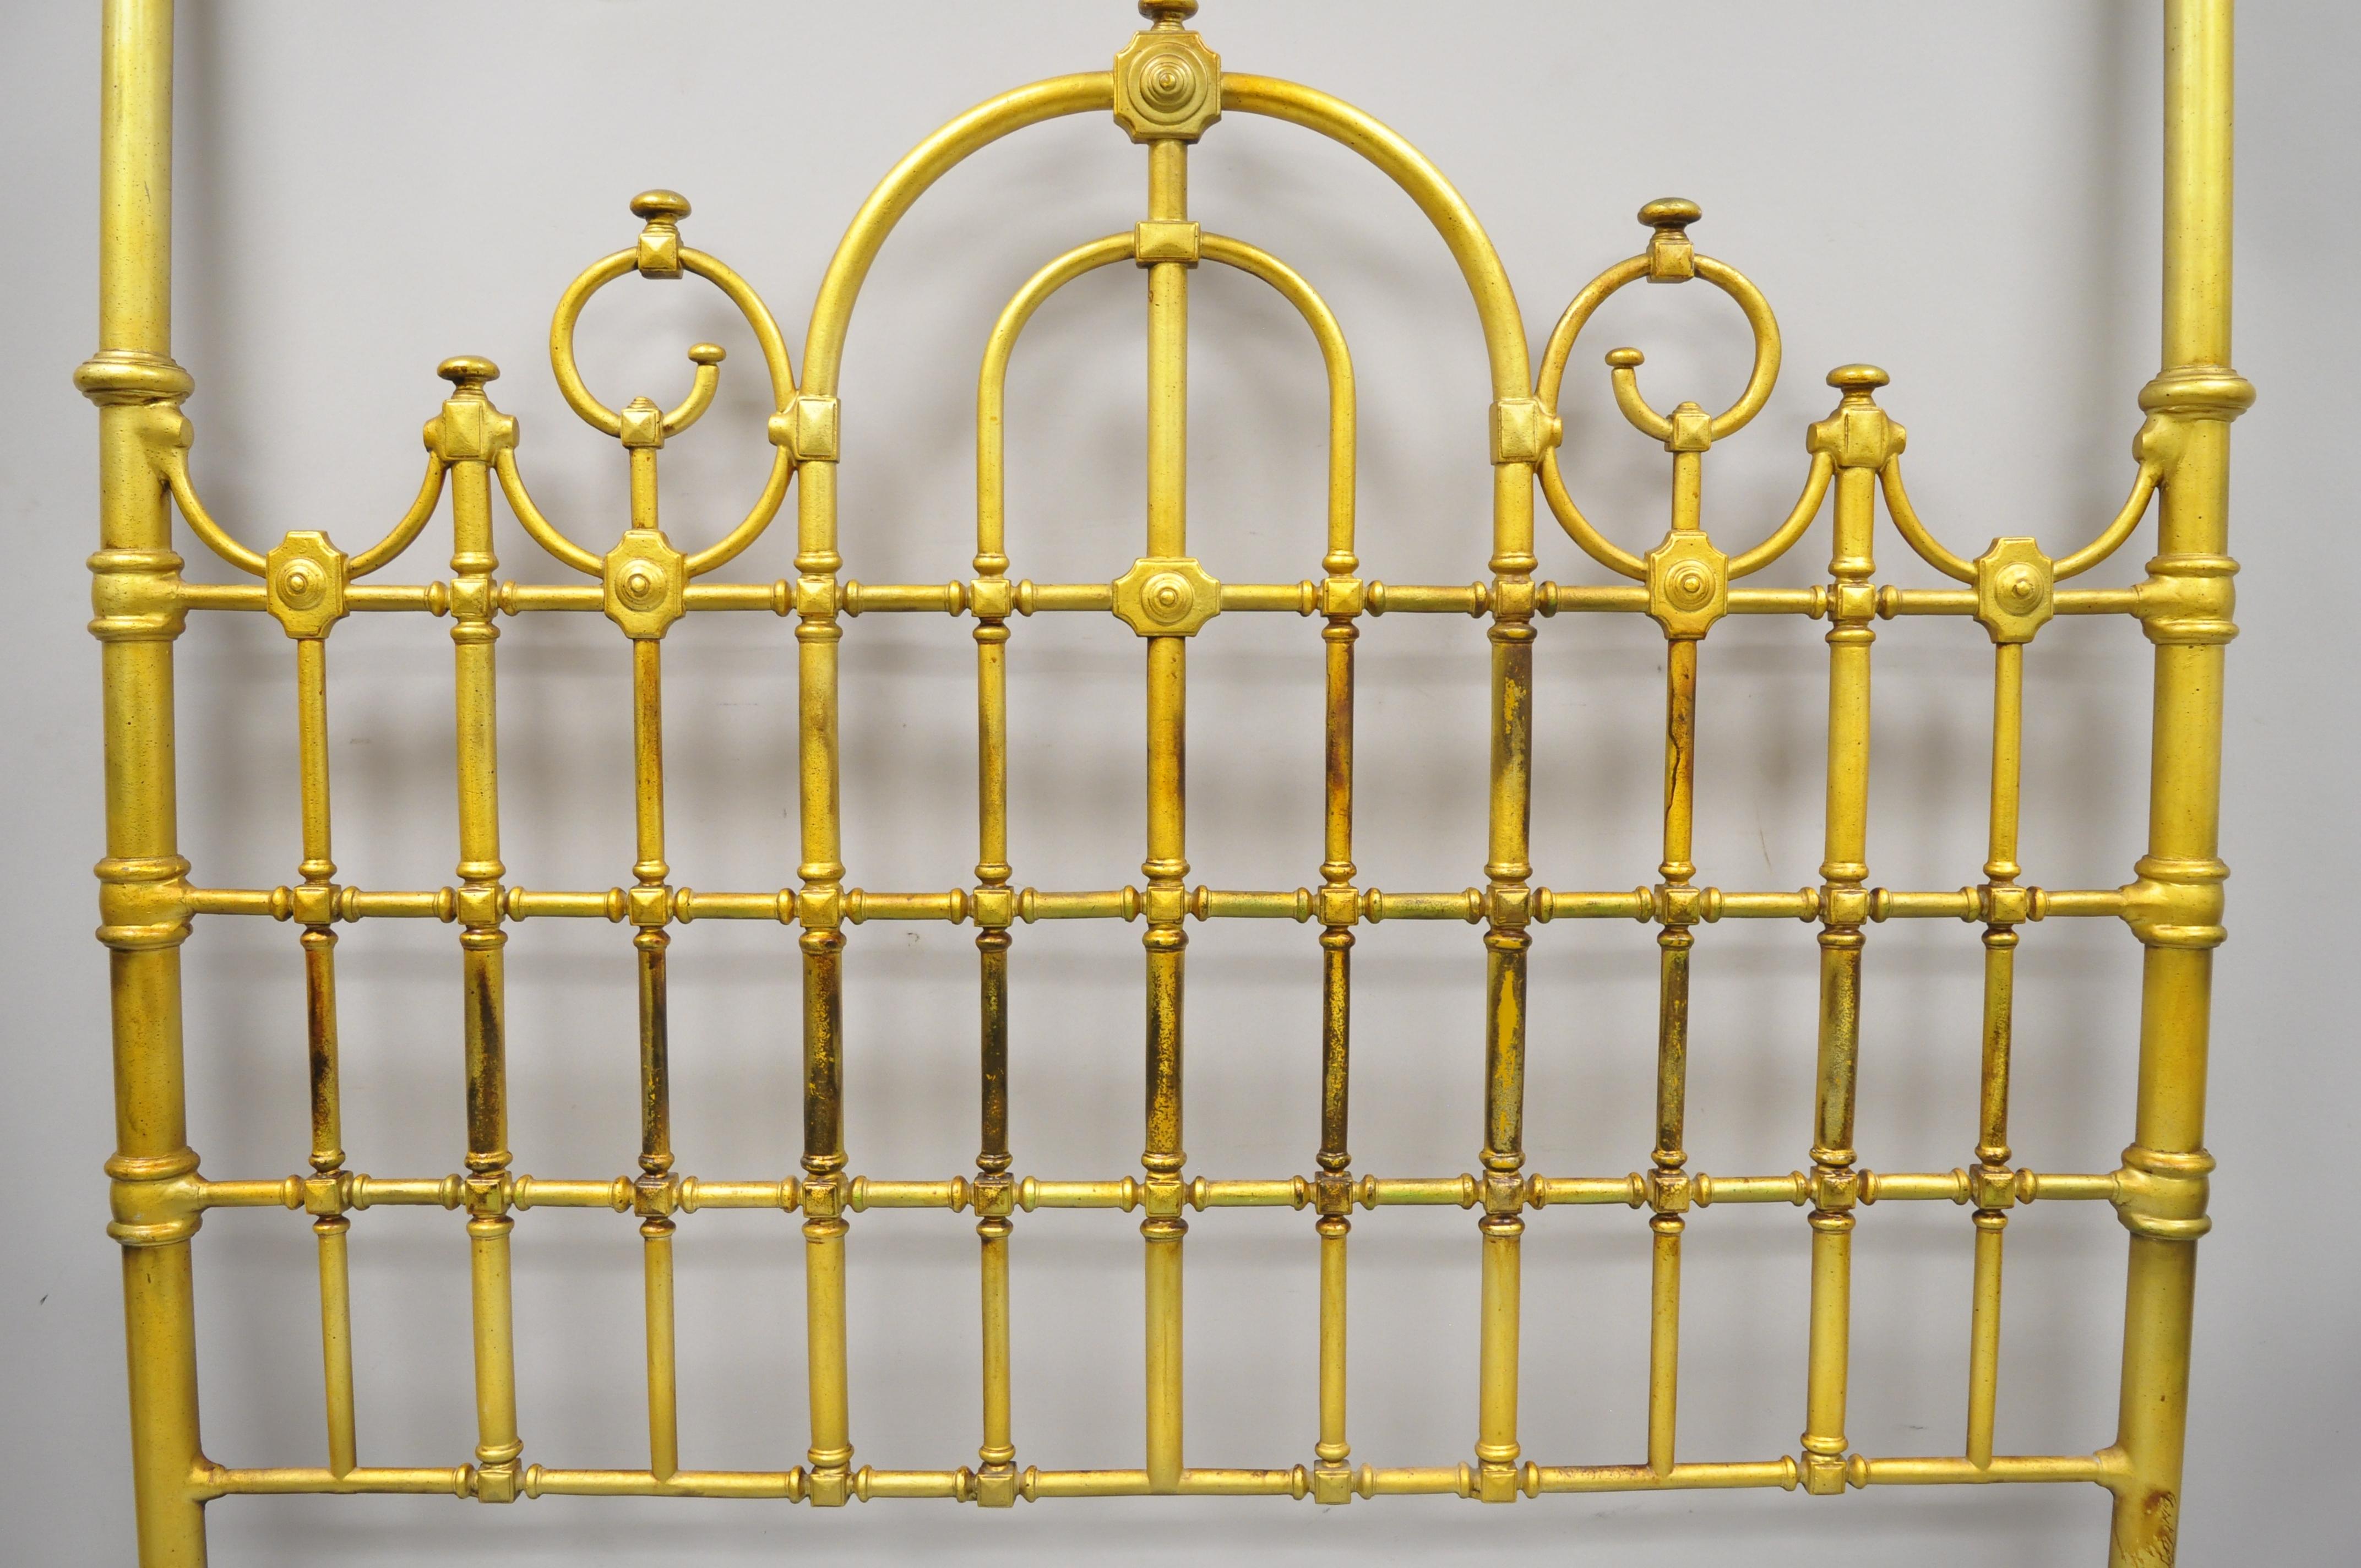 Vintage Italian Hollywood Regency style gold gilt iron metal tall post bed headboard. Queen size (Additional hole mounts for a full mattress as well, see pic #9). Item includes a gold gilt finish, tall posts, ornate frame, great style and form,